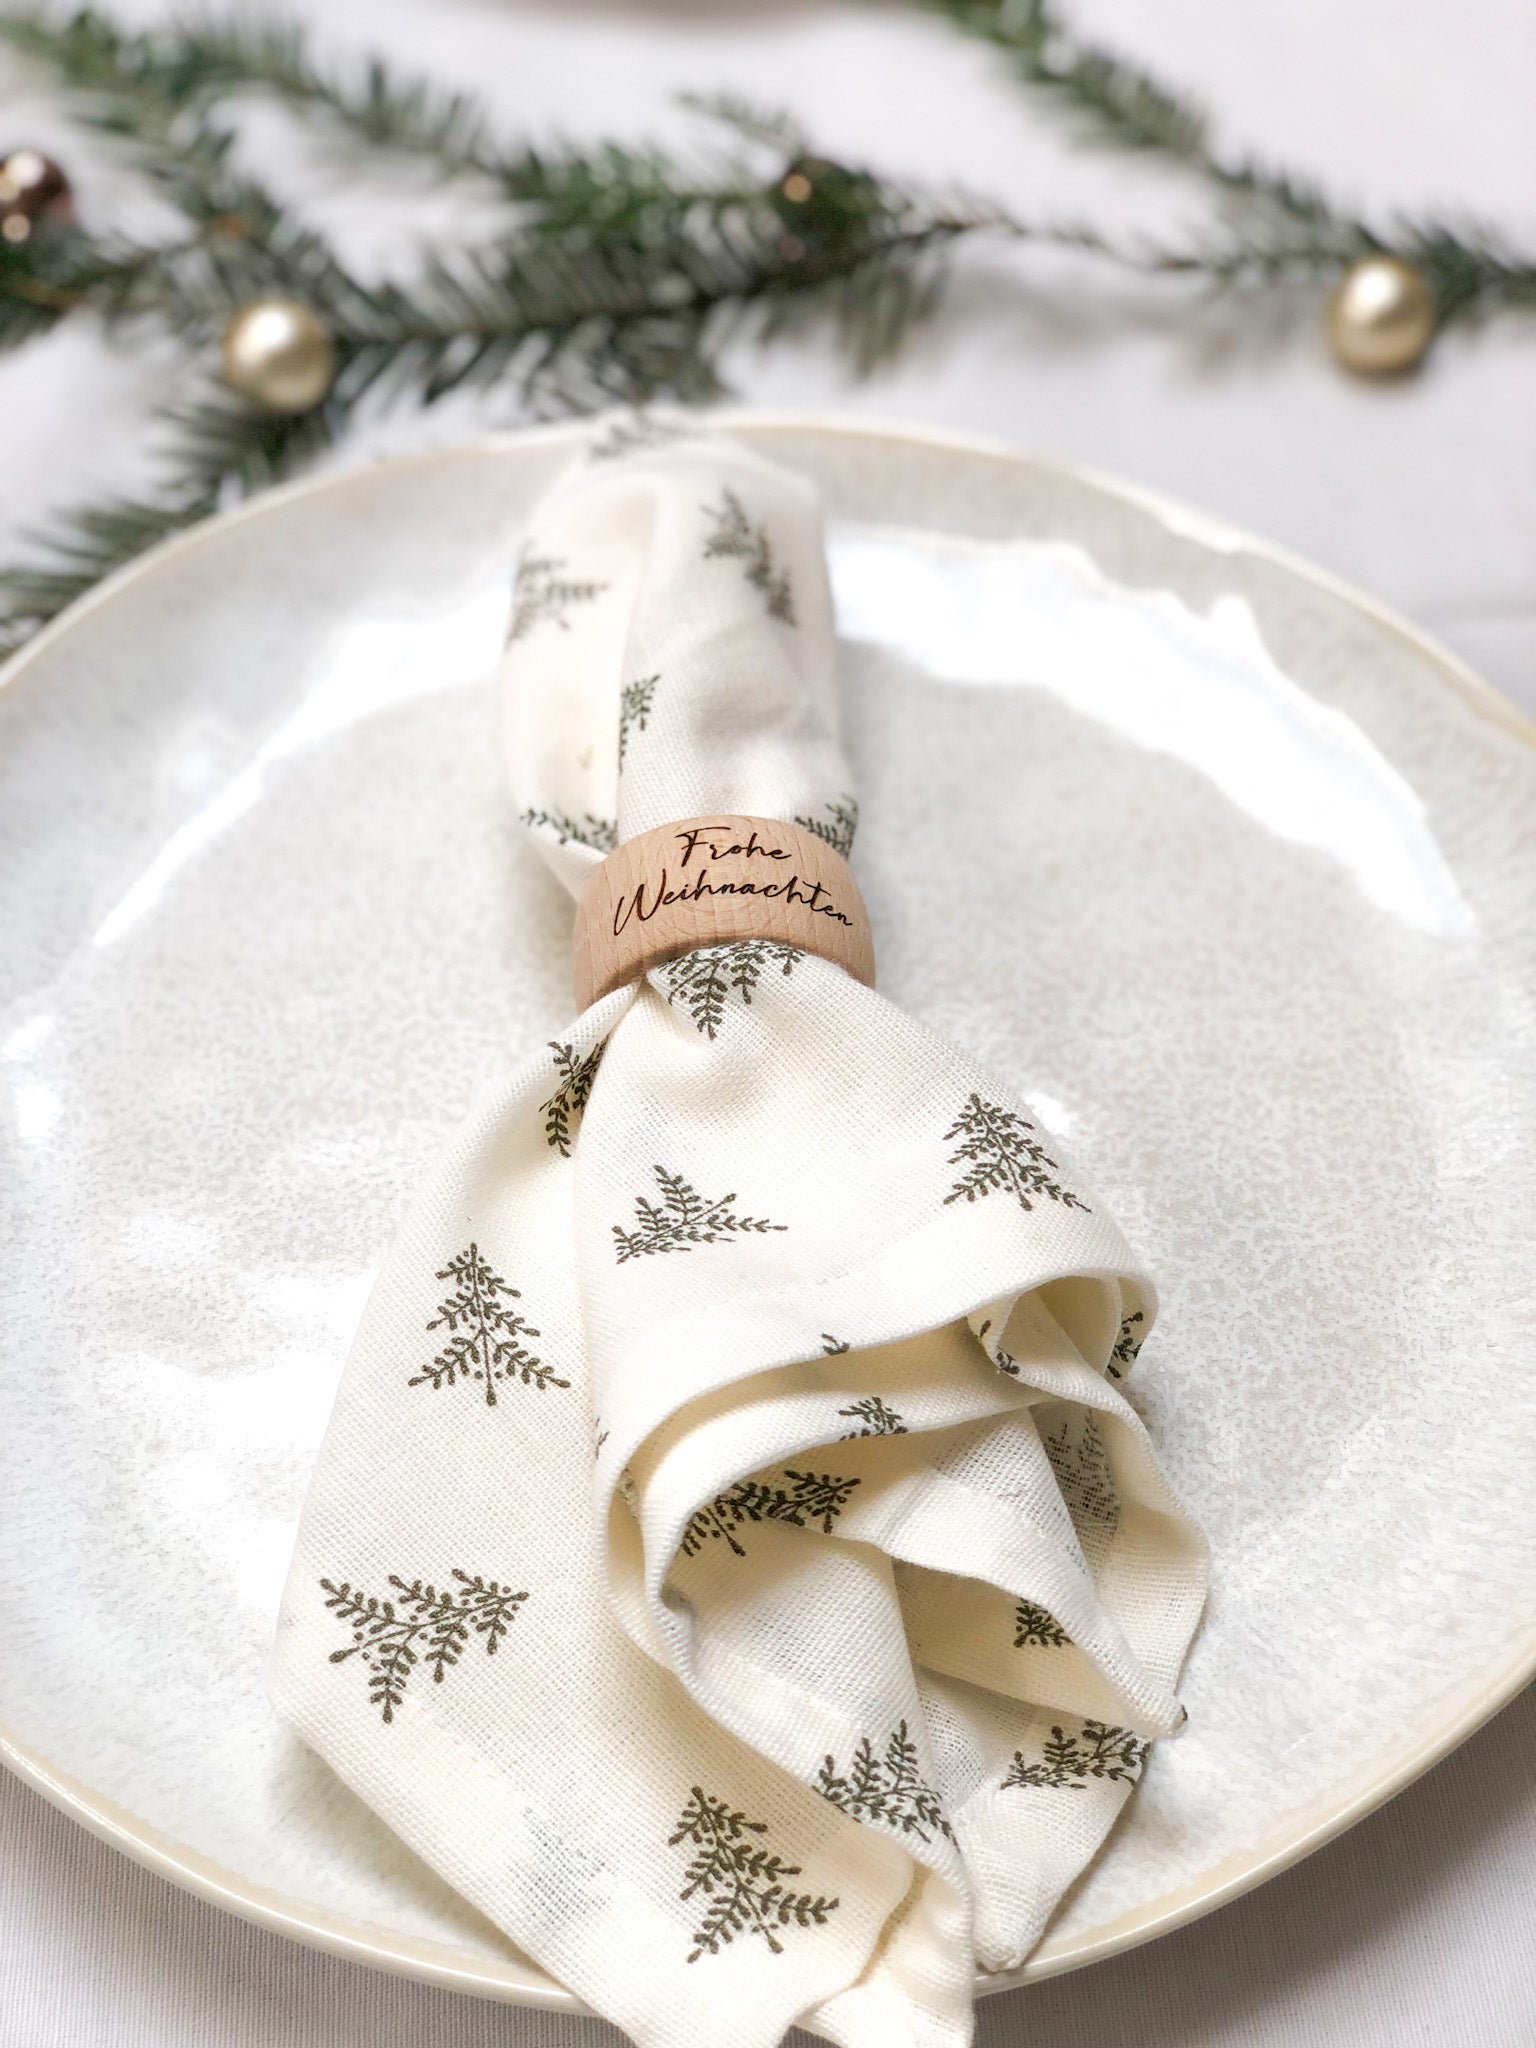 Personalized napkin ring made of beech wood (cursive font)